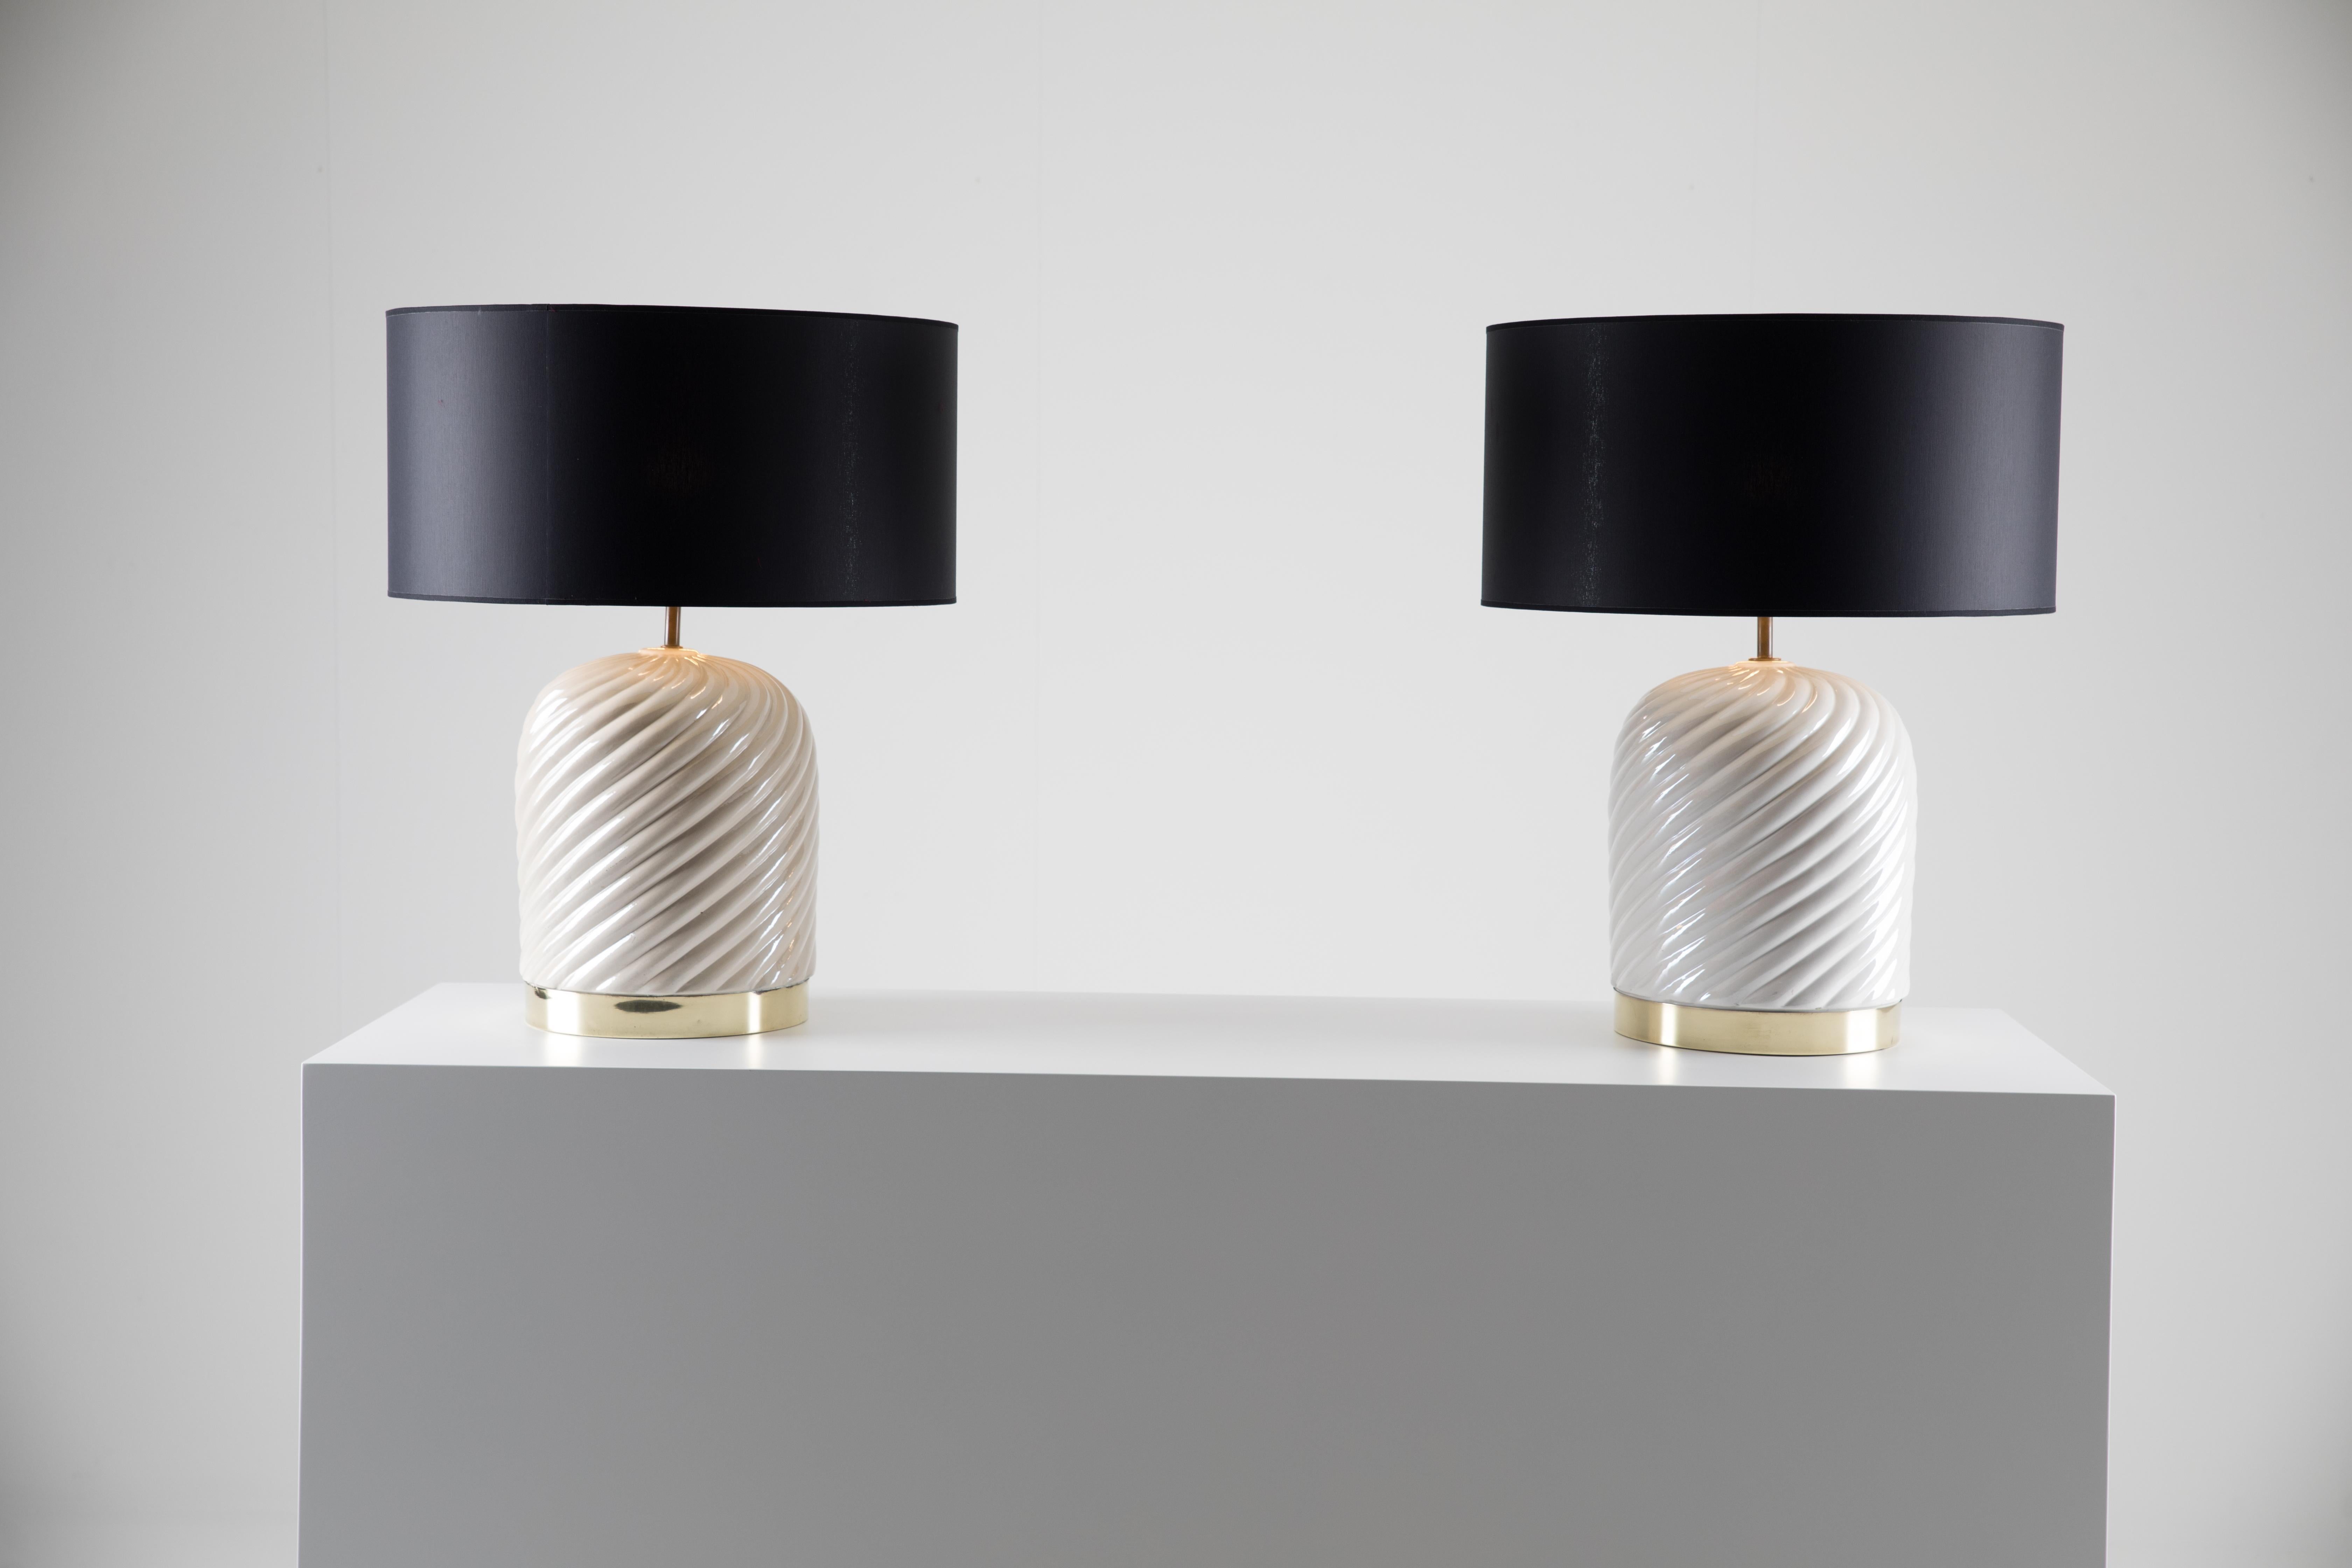 Mid-Century Modern Italian pair of cream glazed ceramic table lamps by Tommaso Barbi.
To notice one lamp is more creamy and the other more old white (see pictures)
A wonderful pair of cream glazed ceramic table lamps designed by Tommaso Barbi.